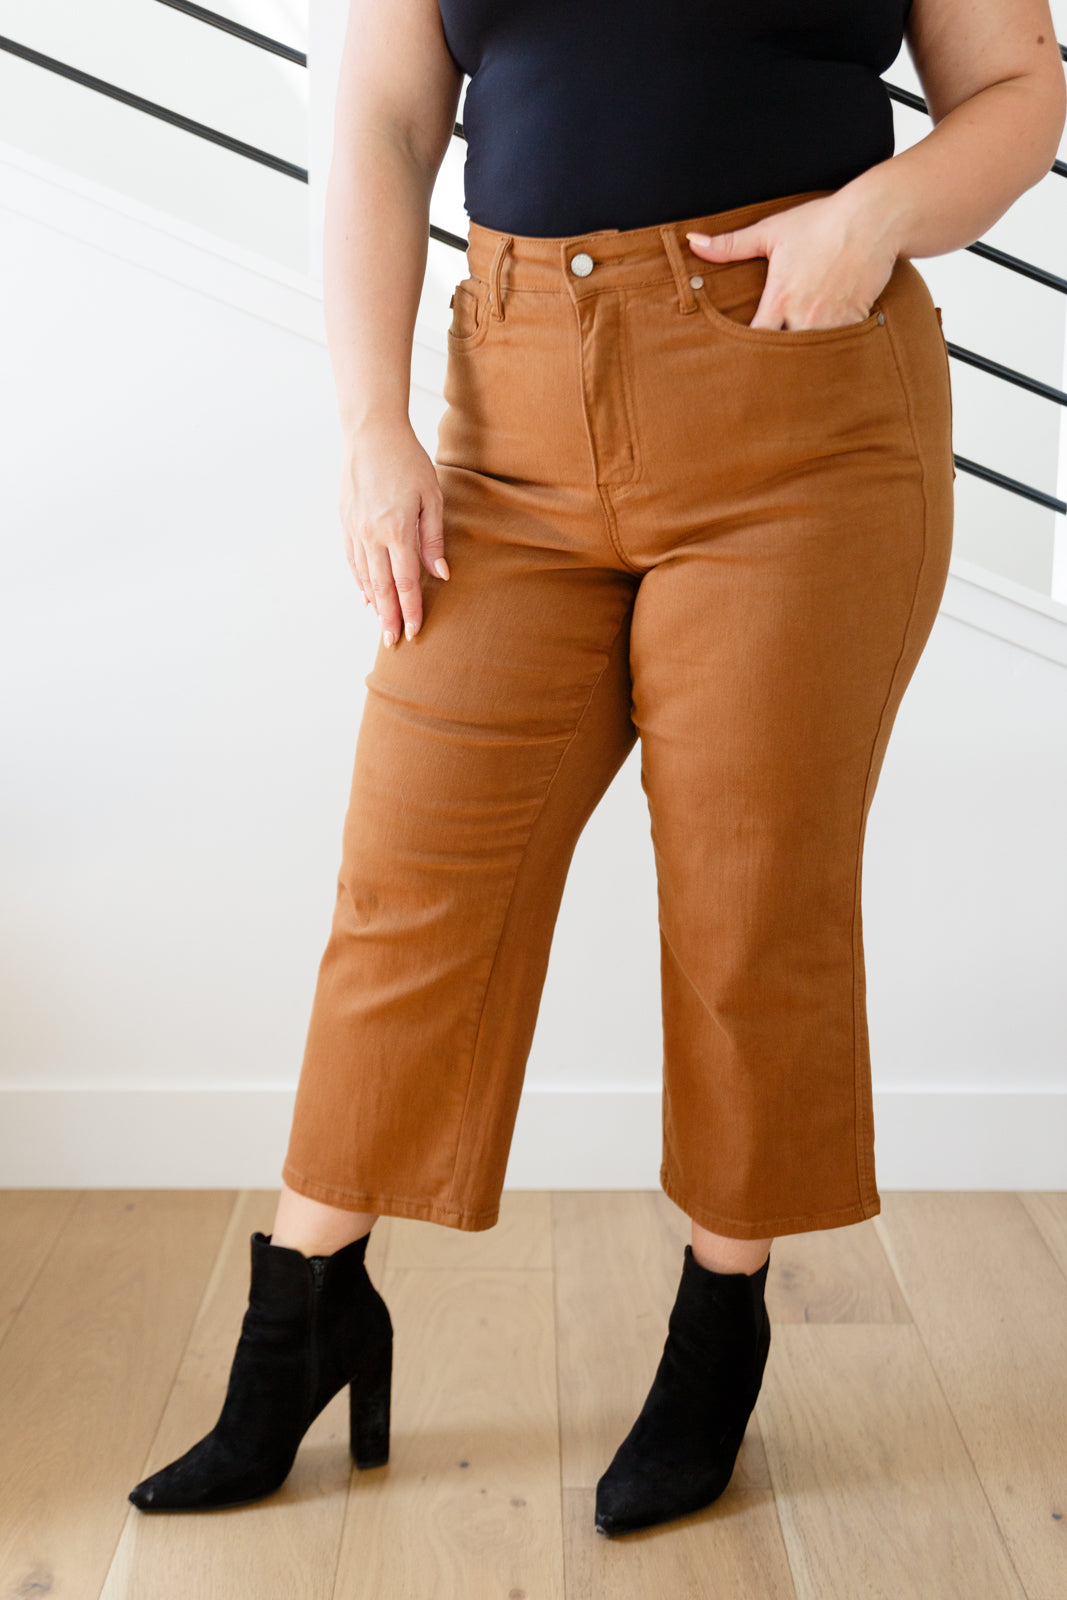 Discover your new favorite jeans with Briar's High Rise Control Top Wide Leg Crop Jeans from Judy Blue. Our triple threat of design, fit, and color come together for maximum style, comfort, and chicness. Features include high rise, tummy control tech, and a wide leg crop in a warm rich garment-dyed camel. Complete with coordinating hardware and you're ready to look and feel amazing! 0 -24W